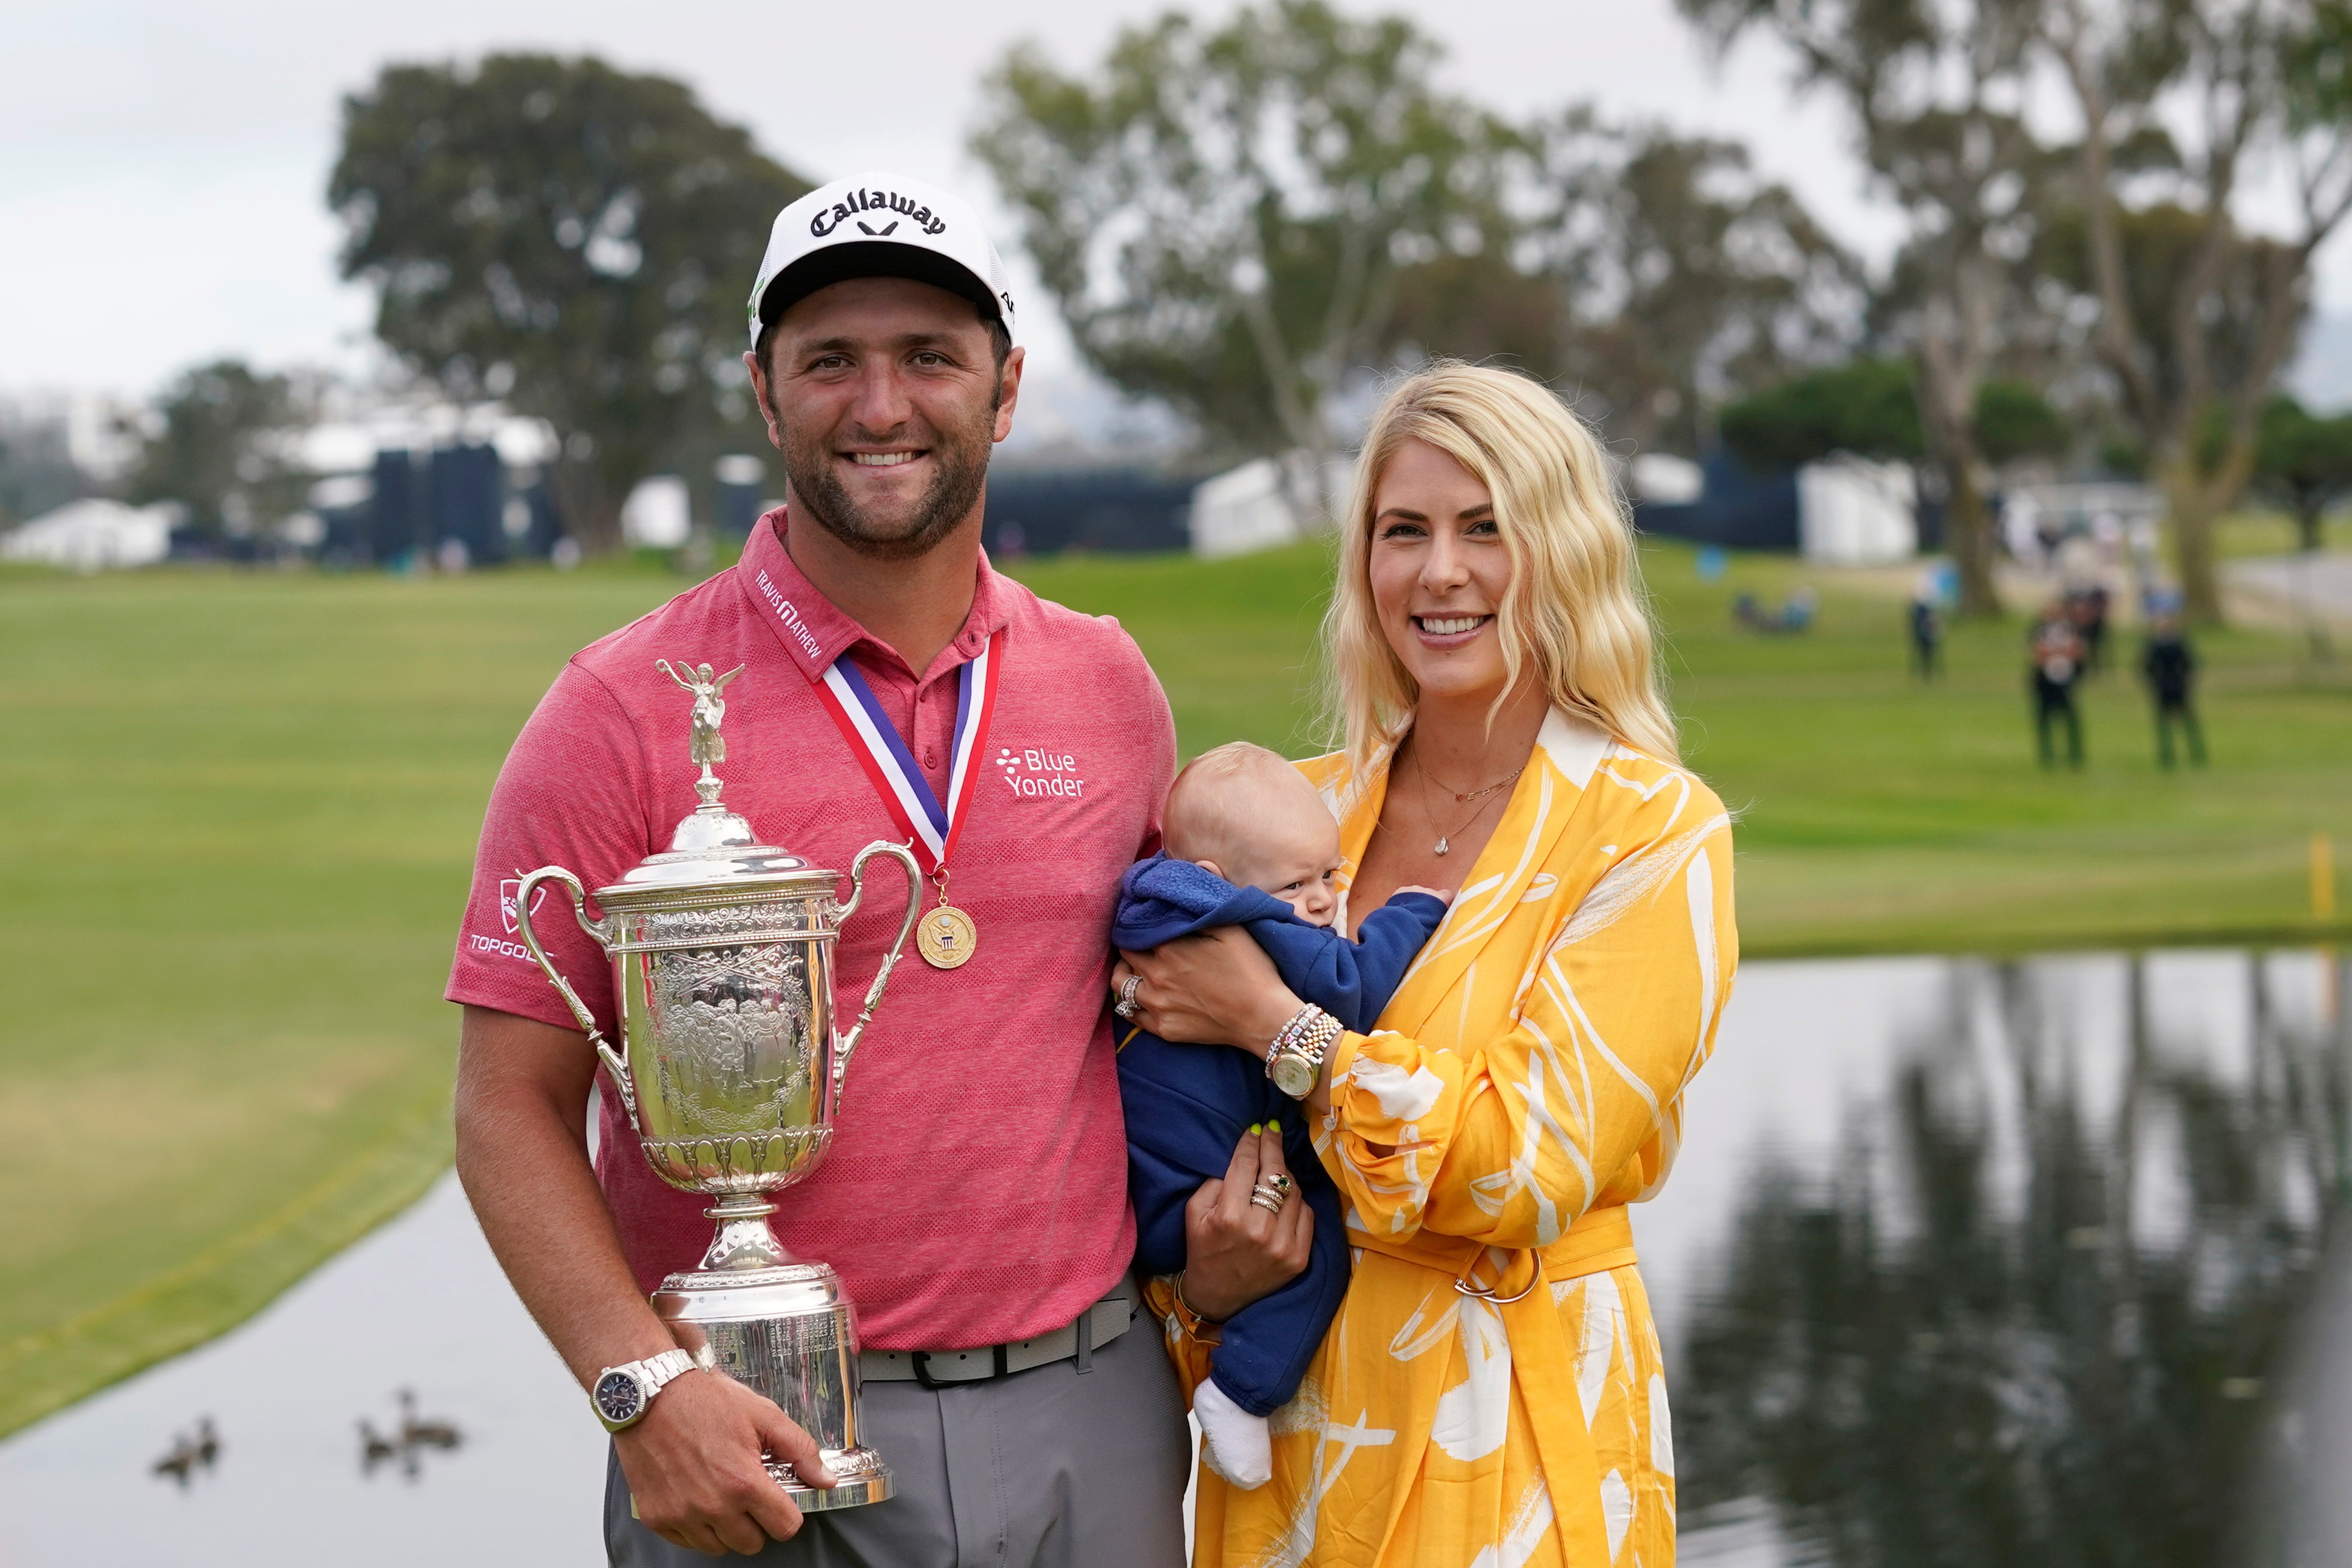 , Brooks Koepka vs Jon Rahm lifestyles compared, from combined £52m fortune to glam Wags as they face off in Masters